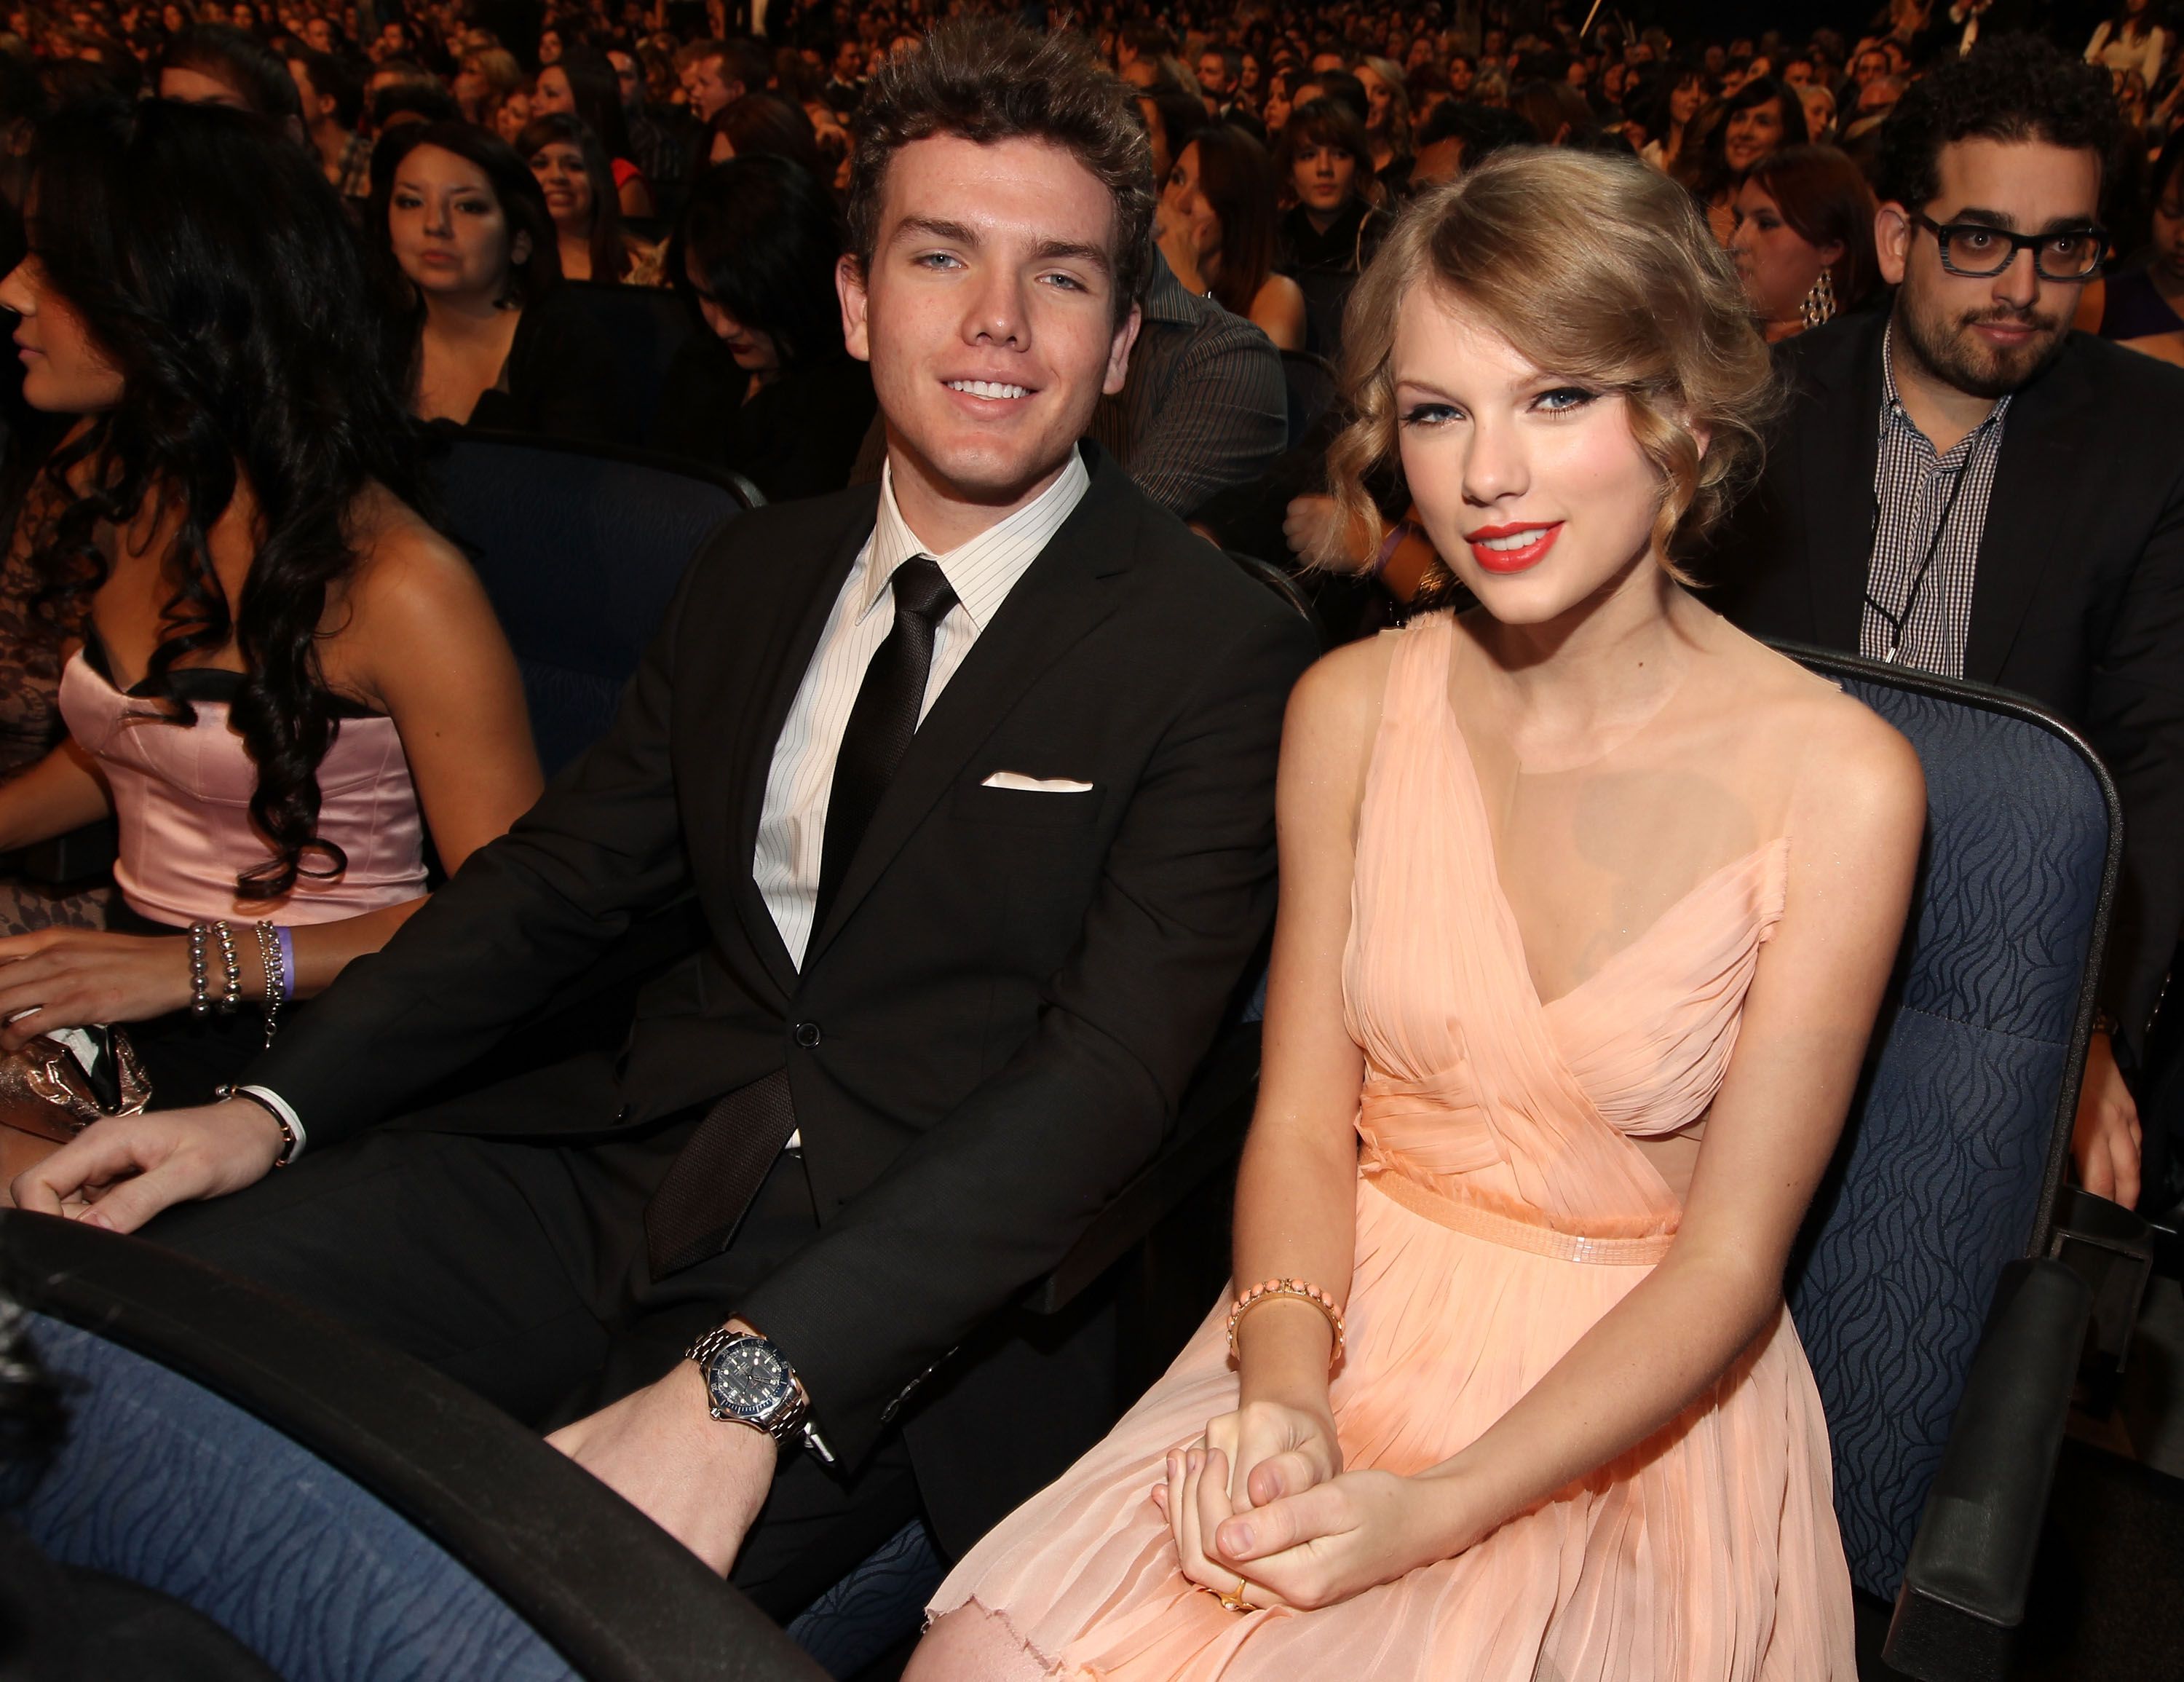 Here's What You Should Know About Taylor Swift's Brother, Austin Swift